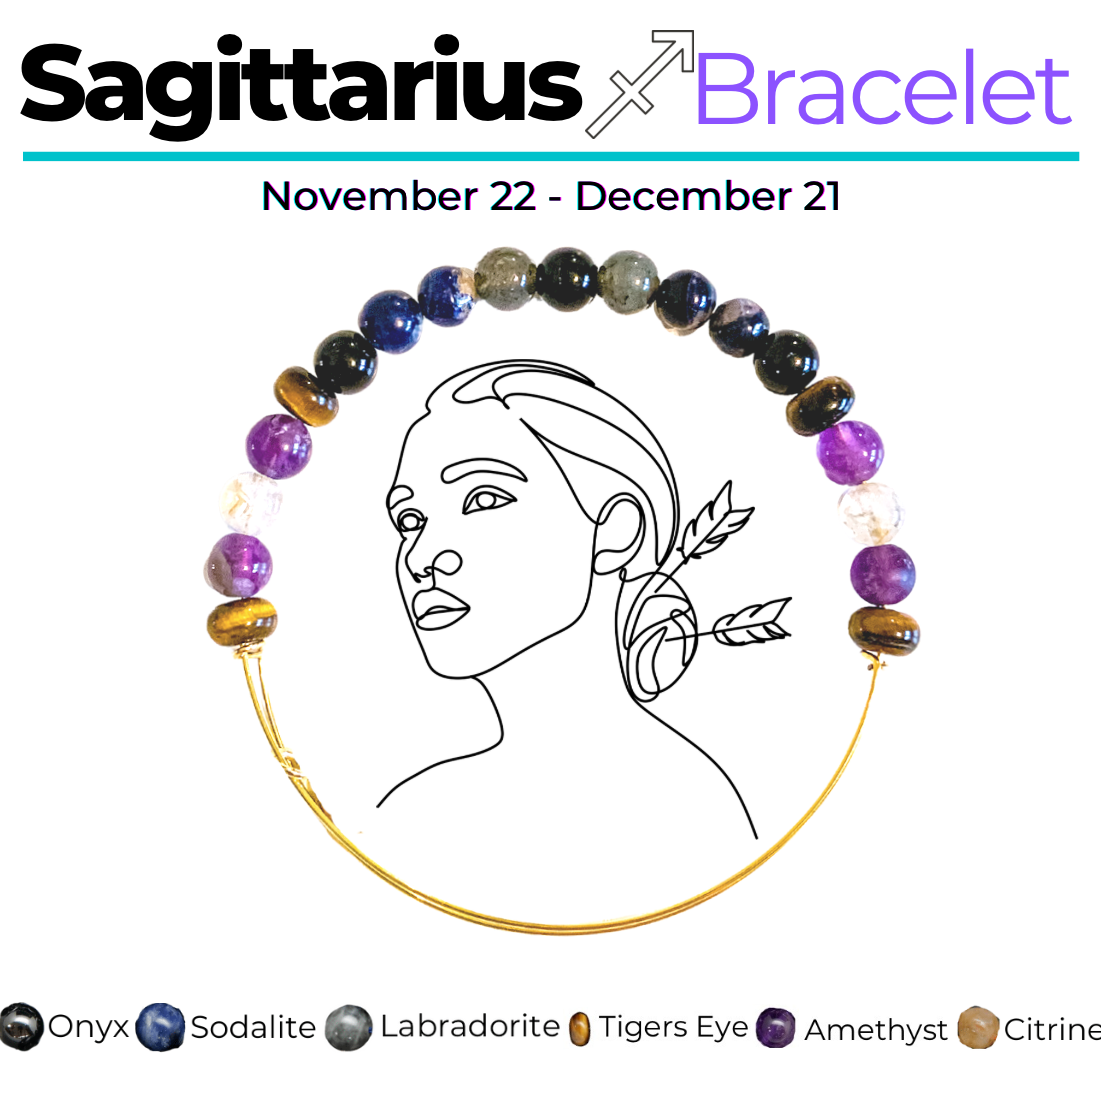 Sagittarius Bracelet with Sodalite and Citrine, perfect for exploration.